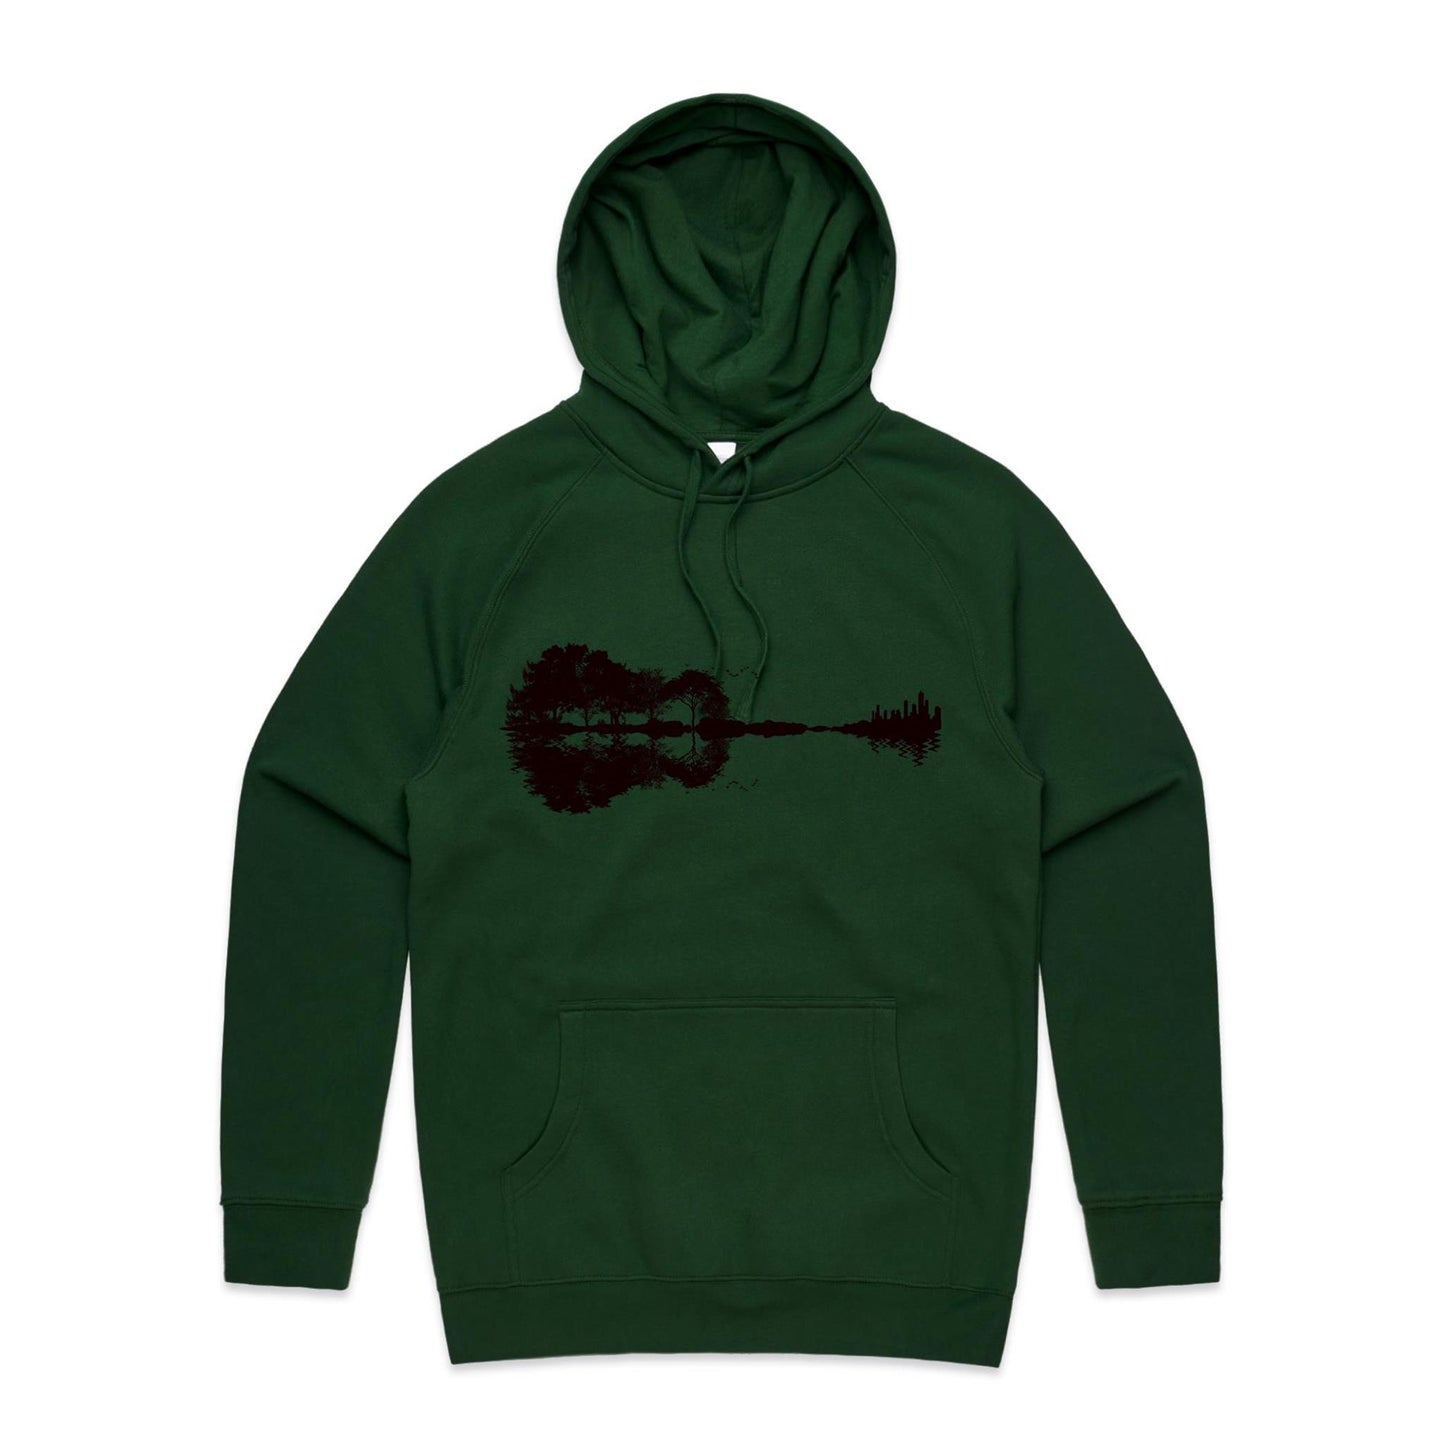 Guitar Reflection - Supply Hood Forest Green Mens Supply Hoodie